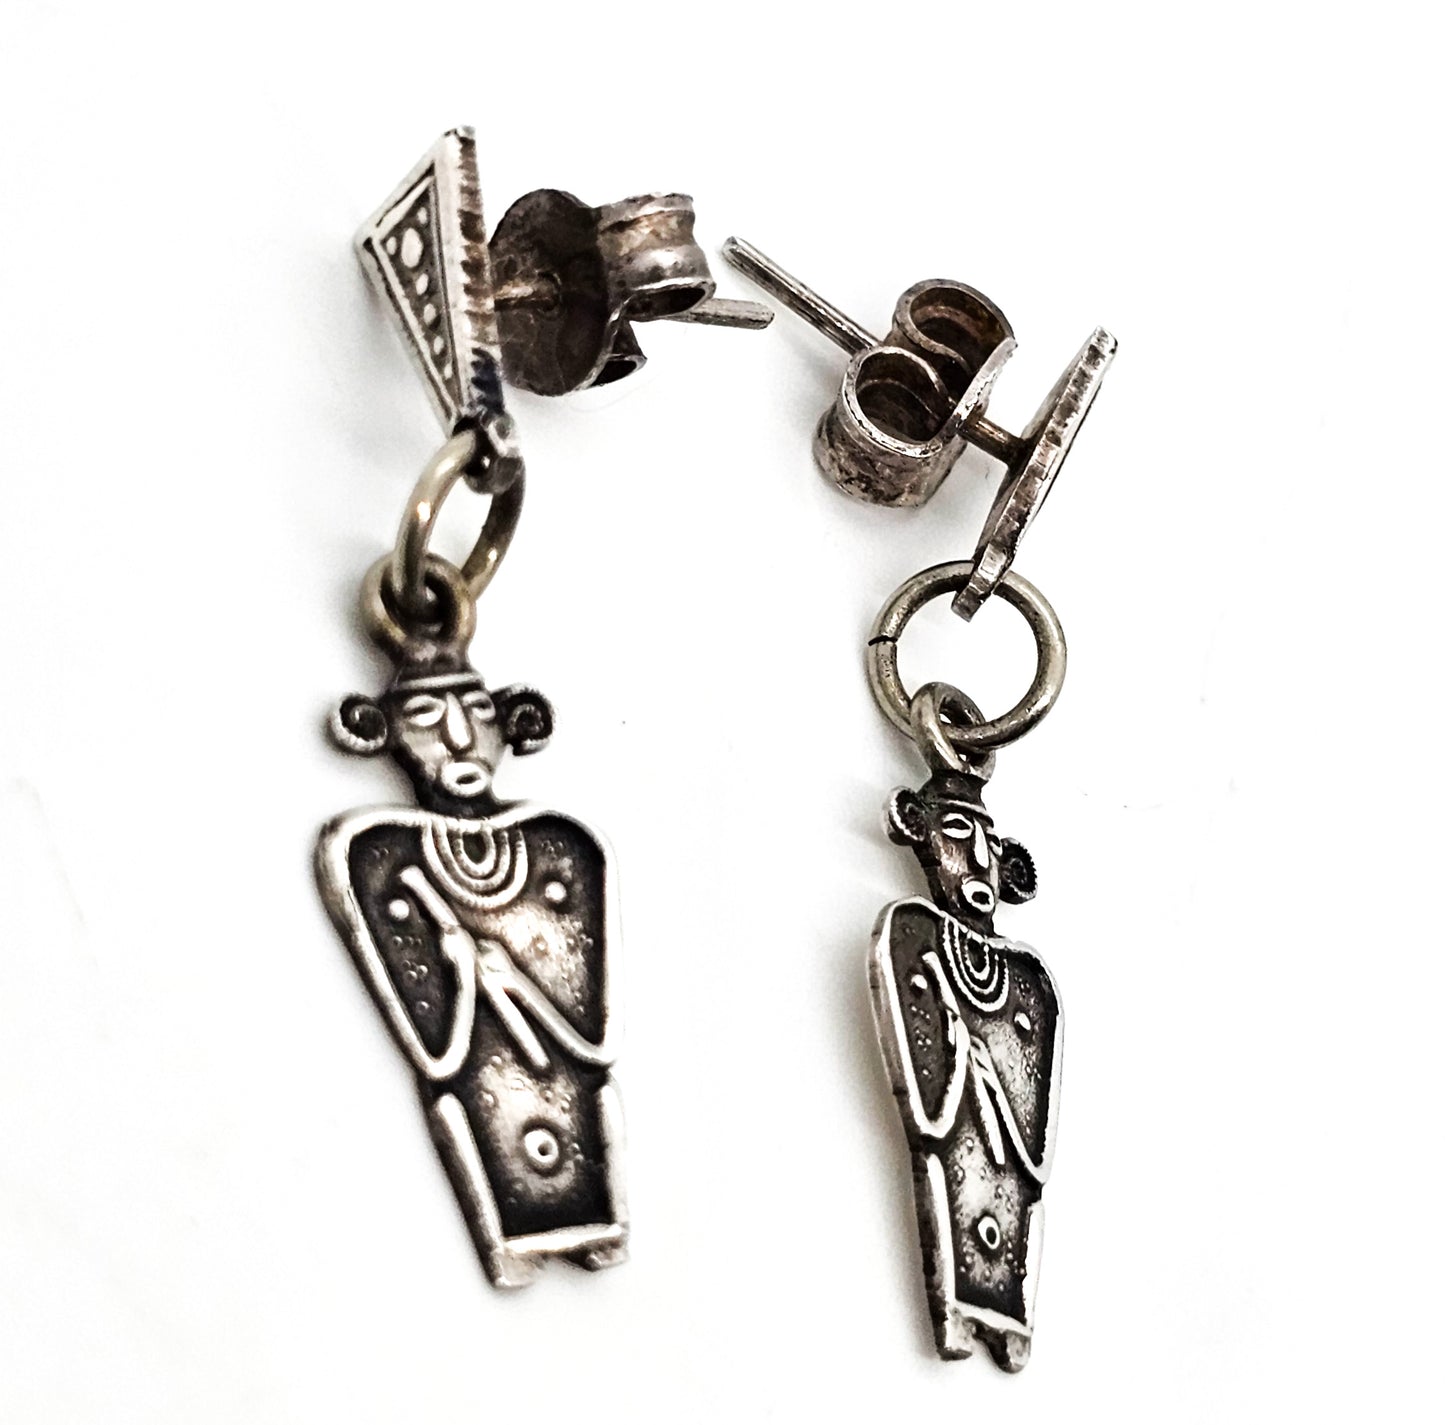 Aztec flute playing silhouette vintage 900 sterling silver post earrings